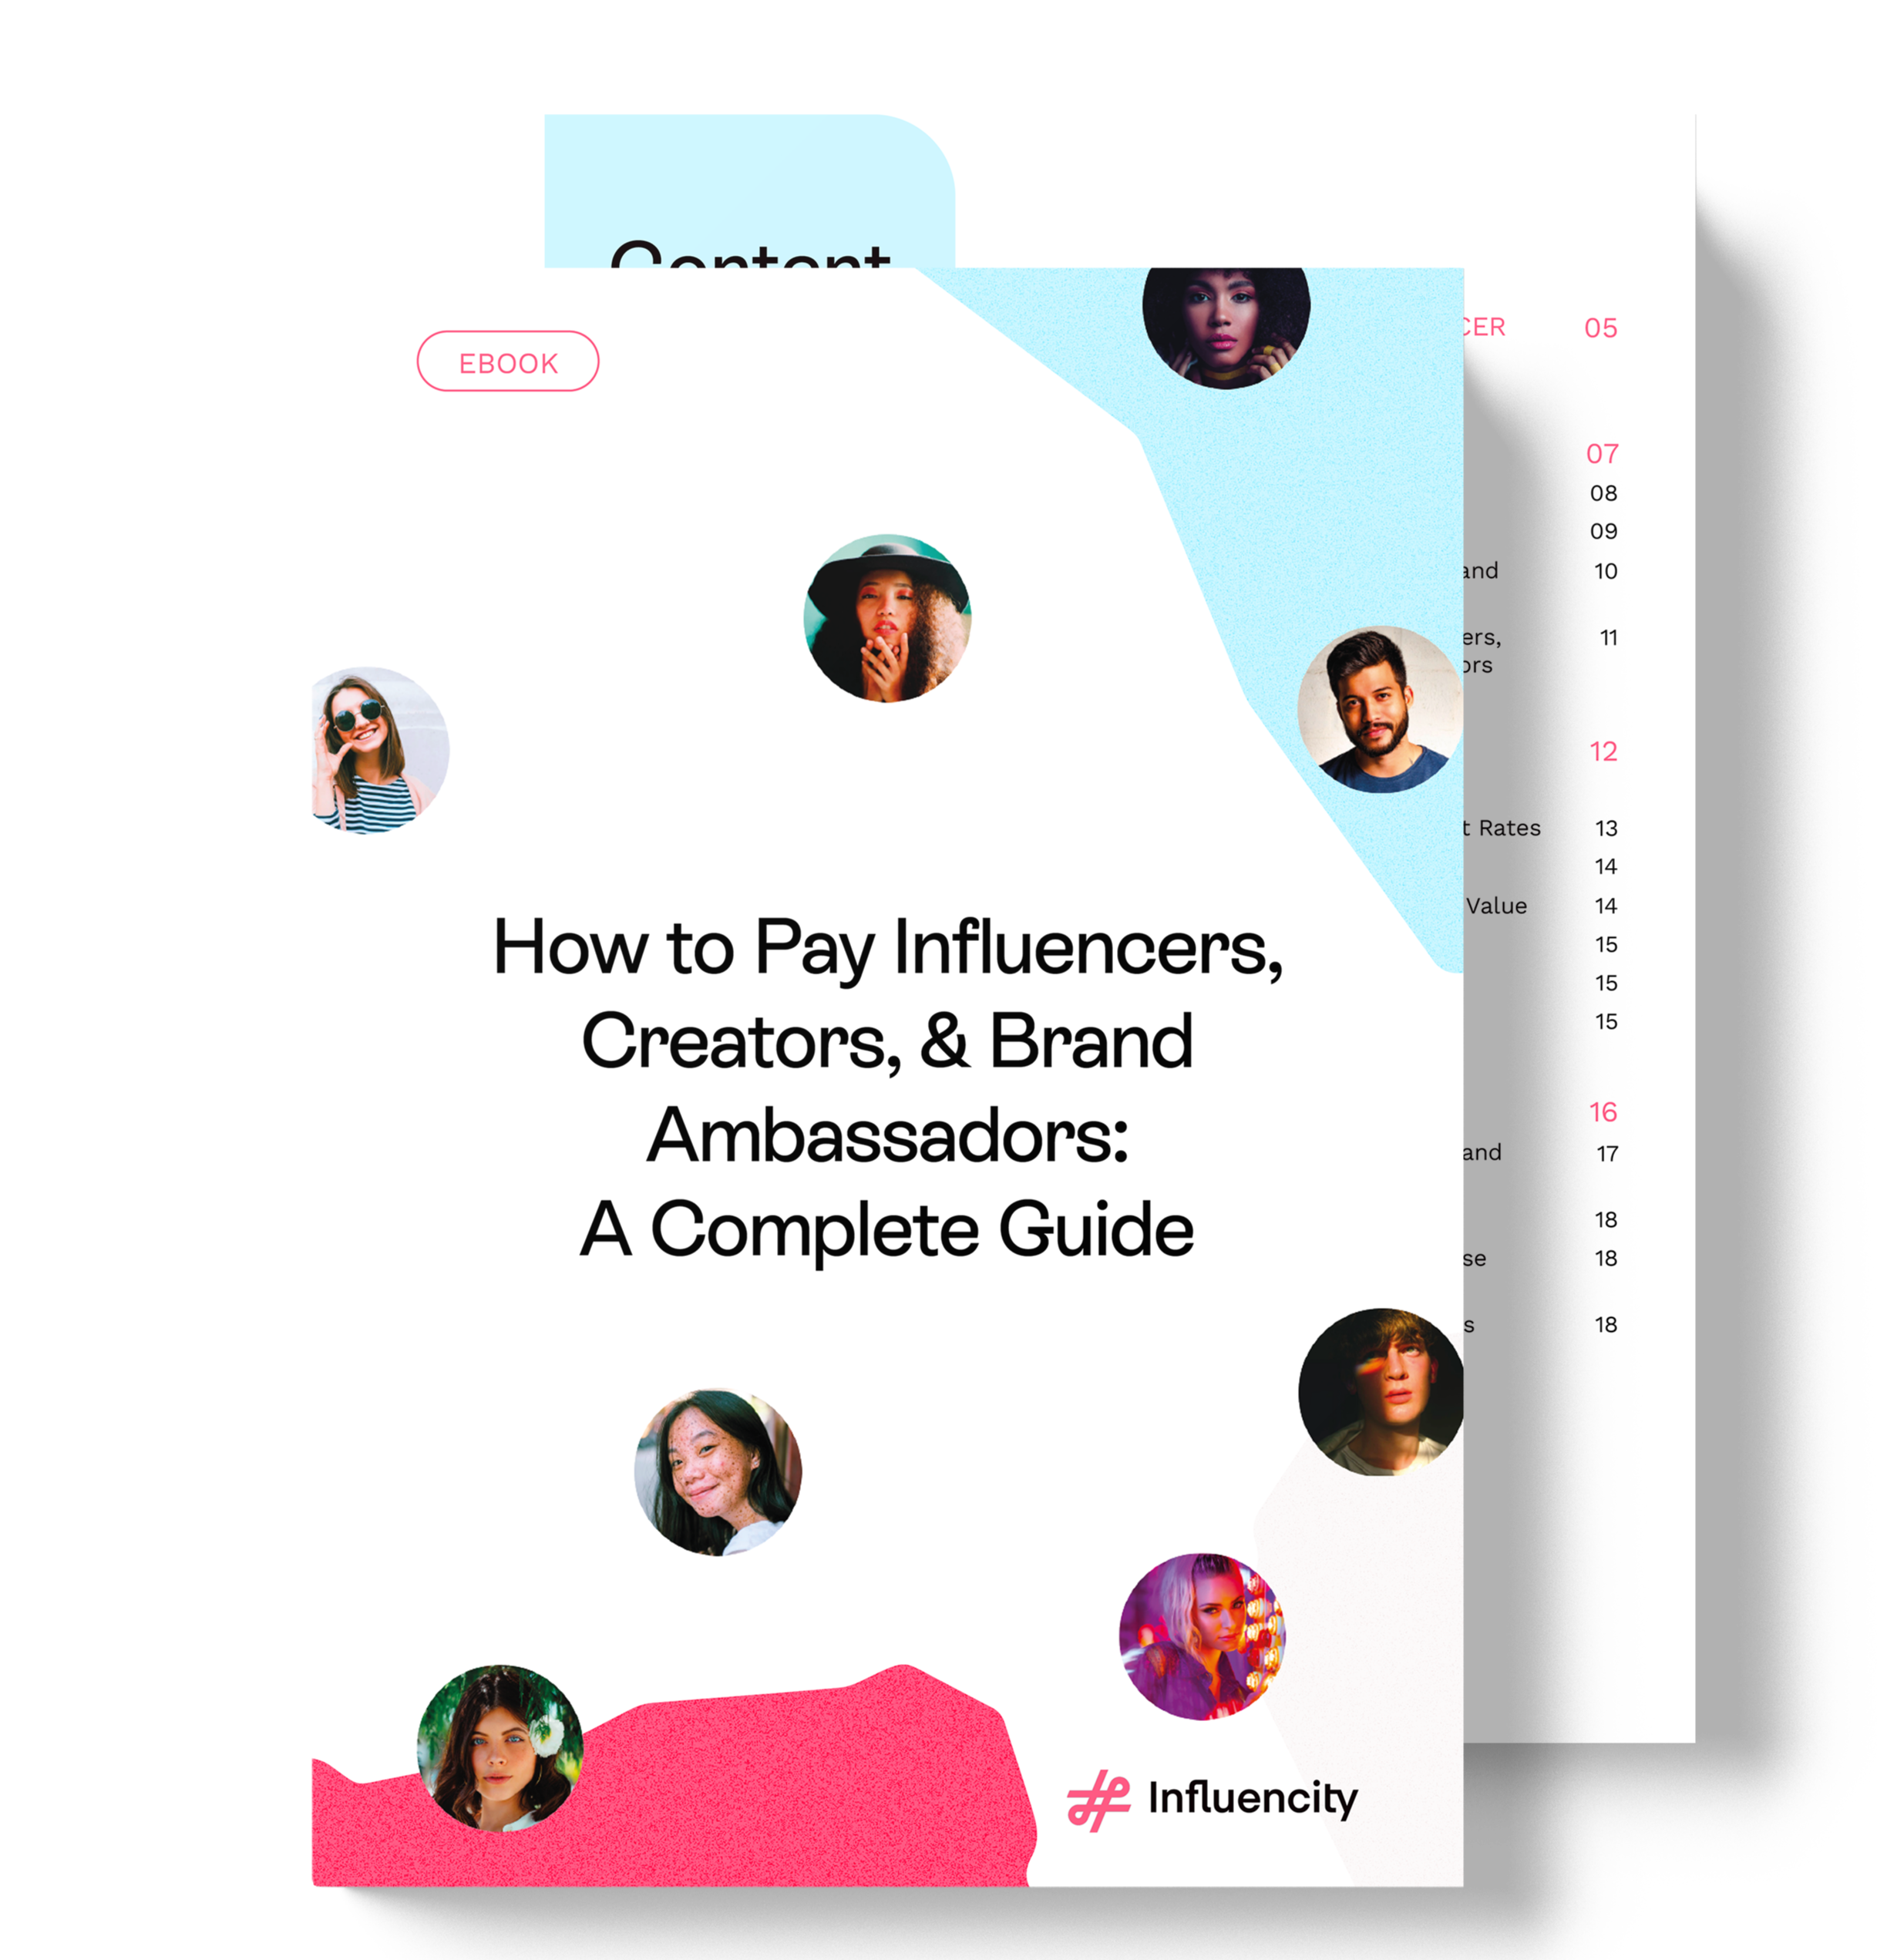 mockup_How to pay infuencers-1